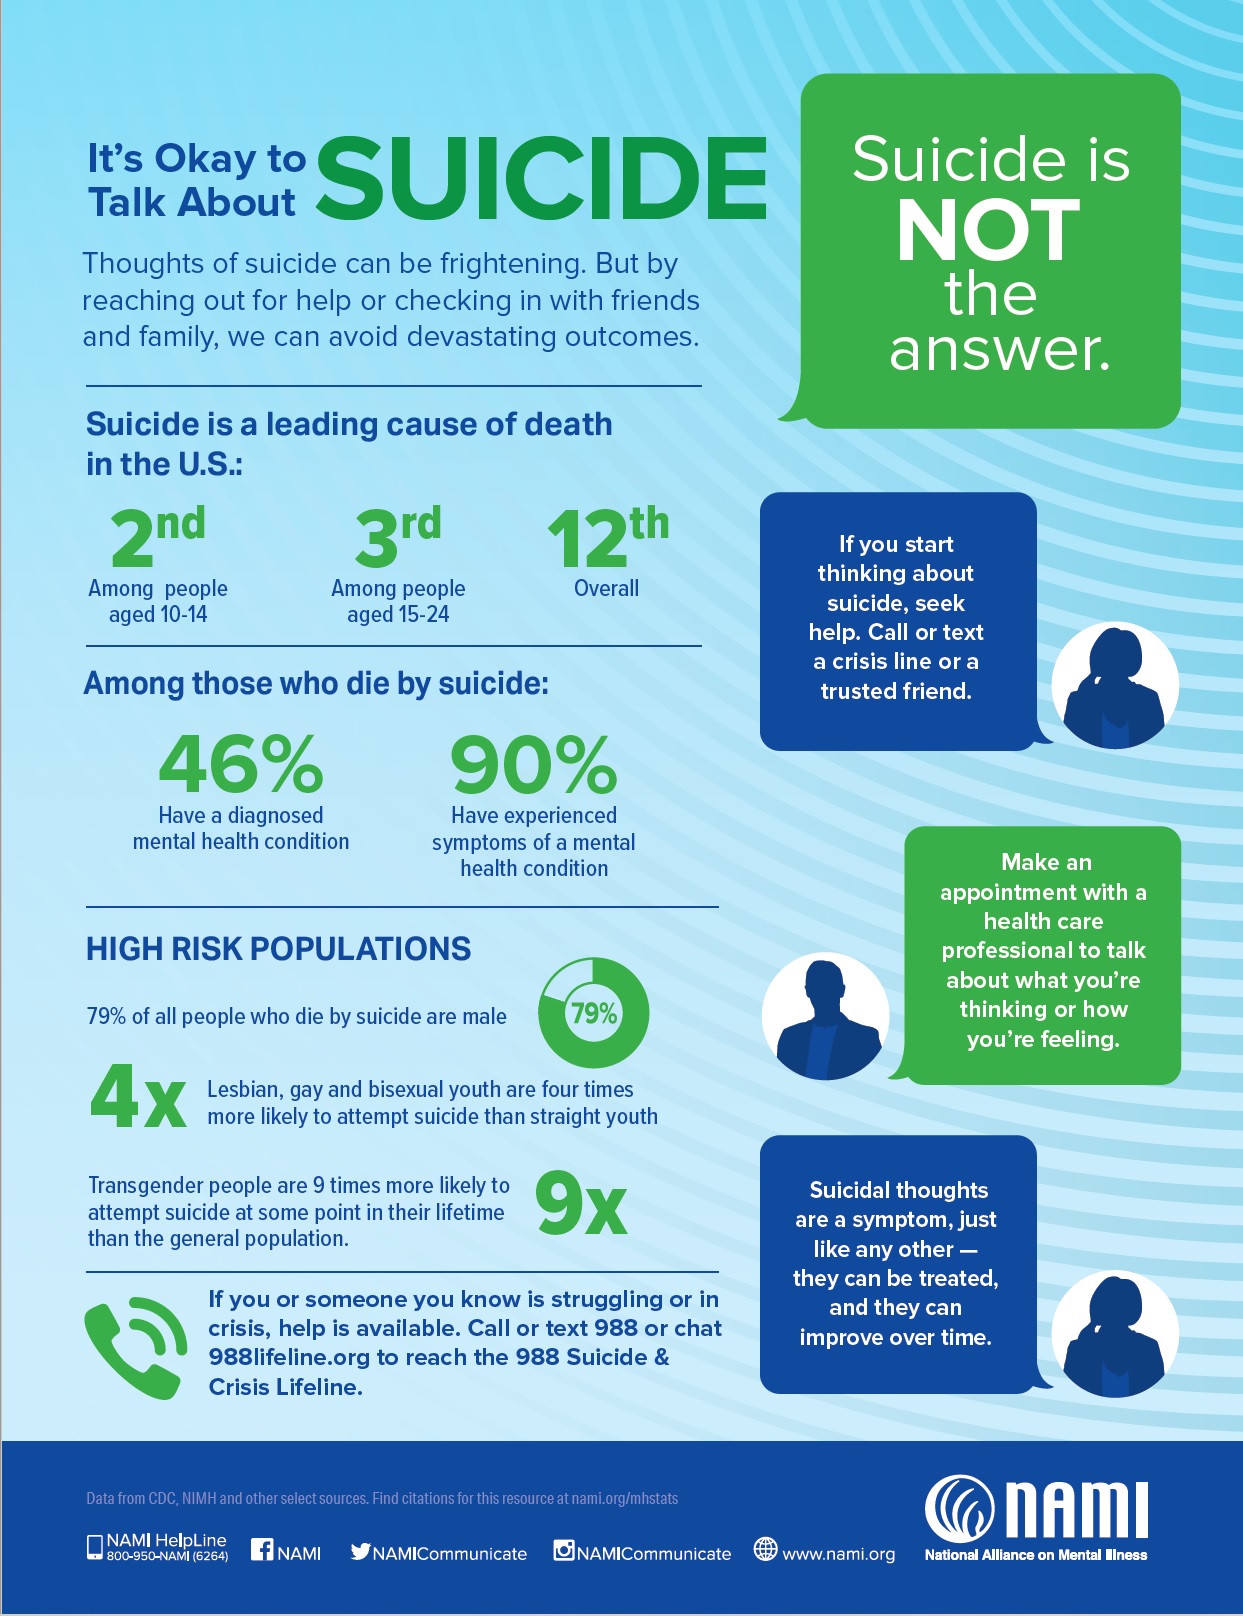 Suicide is NOT the Answer. If you start thinking about suicide, seek help. Call or text a crisis line or a trusted friend. Make an appointment with a health care professional to talk about what you're thinking or how you're feeling. Suicidal thoughts are a symptom, just like any other - they can be treated, and they can improve over time. It's Okay to Talk About Suicide. Thoughts of suicide can be frightening. But by reaching out for help or checking in with friends and family, we can avoid devasting outcomes. Suicide is a leading cause of death in the US: 2nd among people aged 10-14 3rd among people aged 15-24 12th overall Among those who die by suicide: 46% have a diagnosed mental health condition 90% have experienced symptoms of a mental health condition HIGH RISK POPULATIONS 79% of all people who ide by suicide are male. 4x Lesbian, gay and bisexual youth are four times more likely to attempt suicide than straight youth. 9x Transgender people are 9 times more likely to attempt suicide at some point in their lifetime than the general population. If you or someone you know is struggling or in crisis, help is available. Call or text 988 or chat 988lifeline.org to reach the 988 Suicide & Crisis Lifeline. Data from CDC, NIMH and other select sources. Find citations for this resource at nami.org/mhstats. NAMI HelpLine 800-950-NAMI (6264) Facebook.com/NAMI Twitter.com/NAMICommunicate Instagram.com/NAMICommunicate www.nami.org NAMI National Alliance on Mental Illness